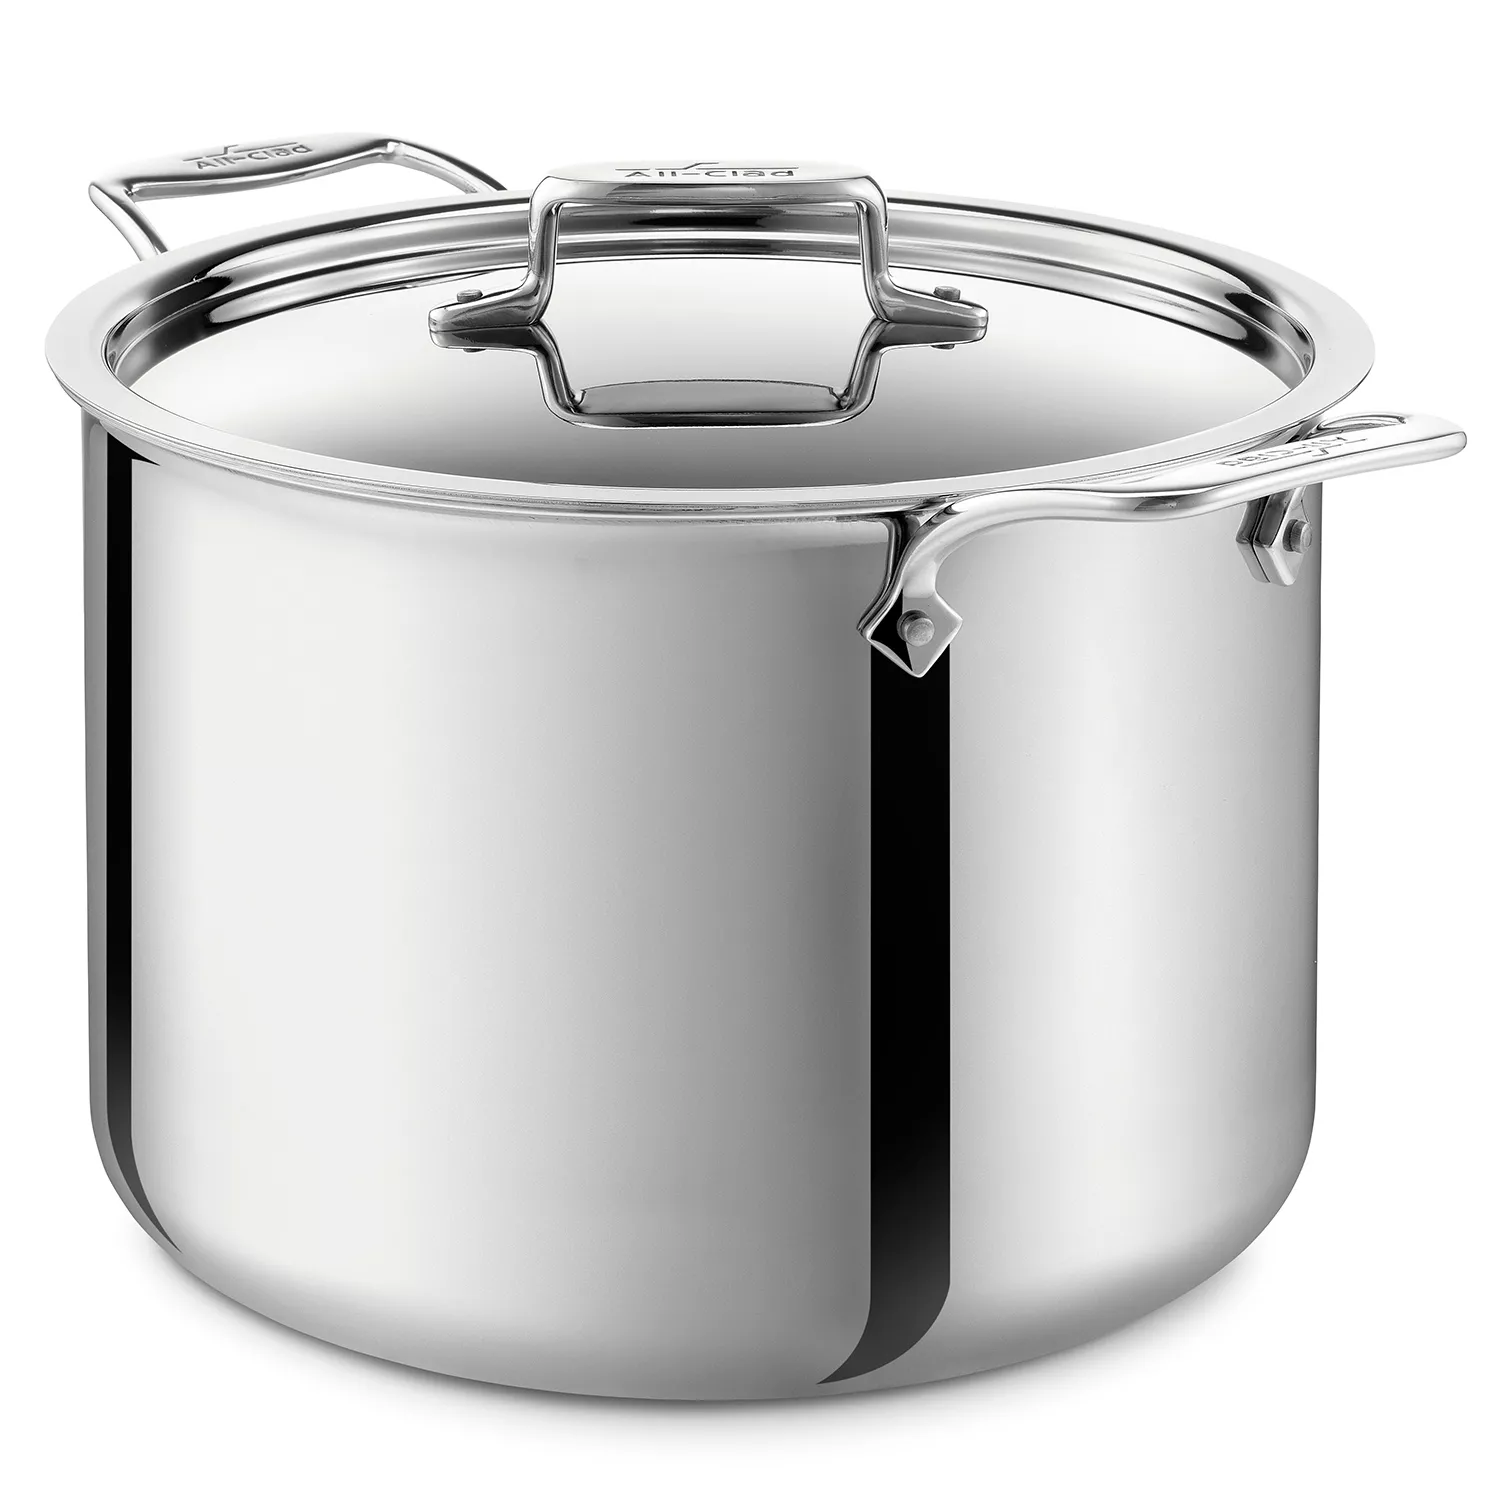 All-Clad D5 Brushed Stainless Steel Stockpot | Sur La Table